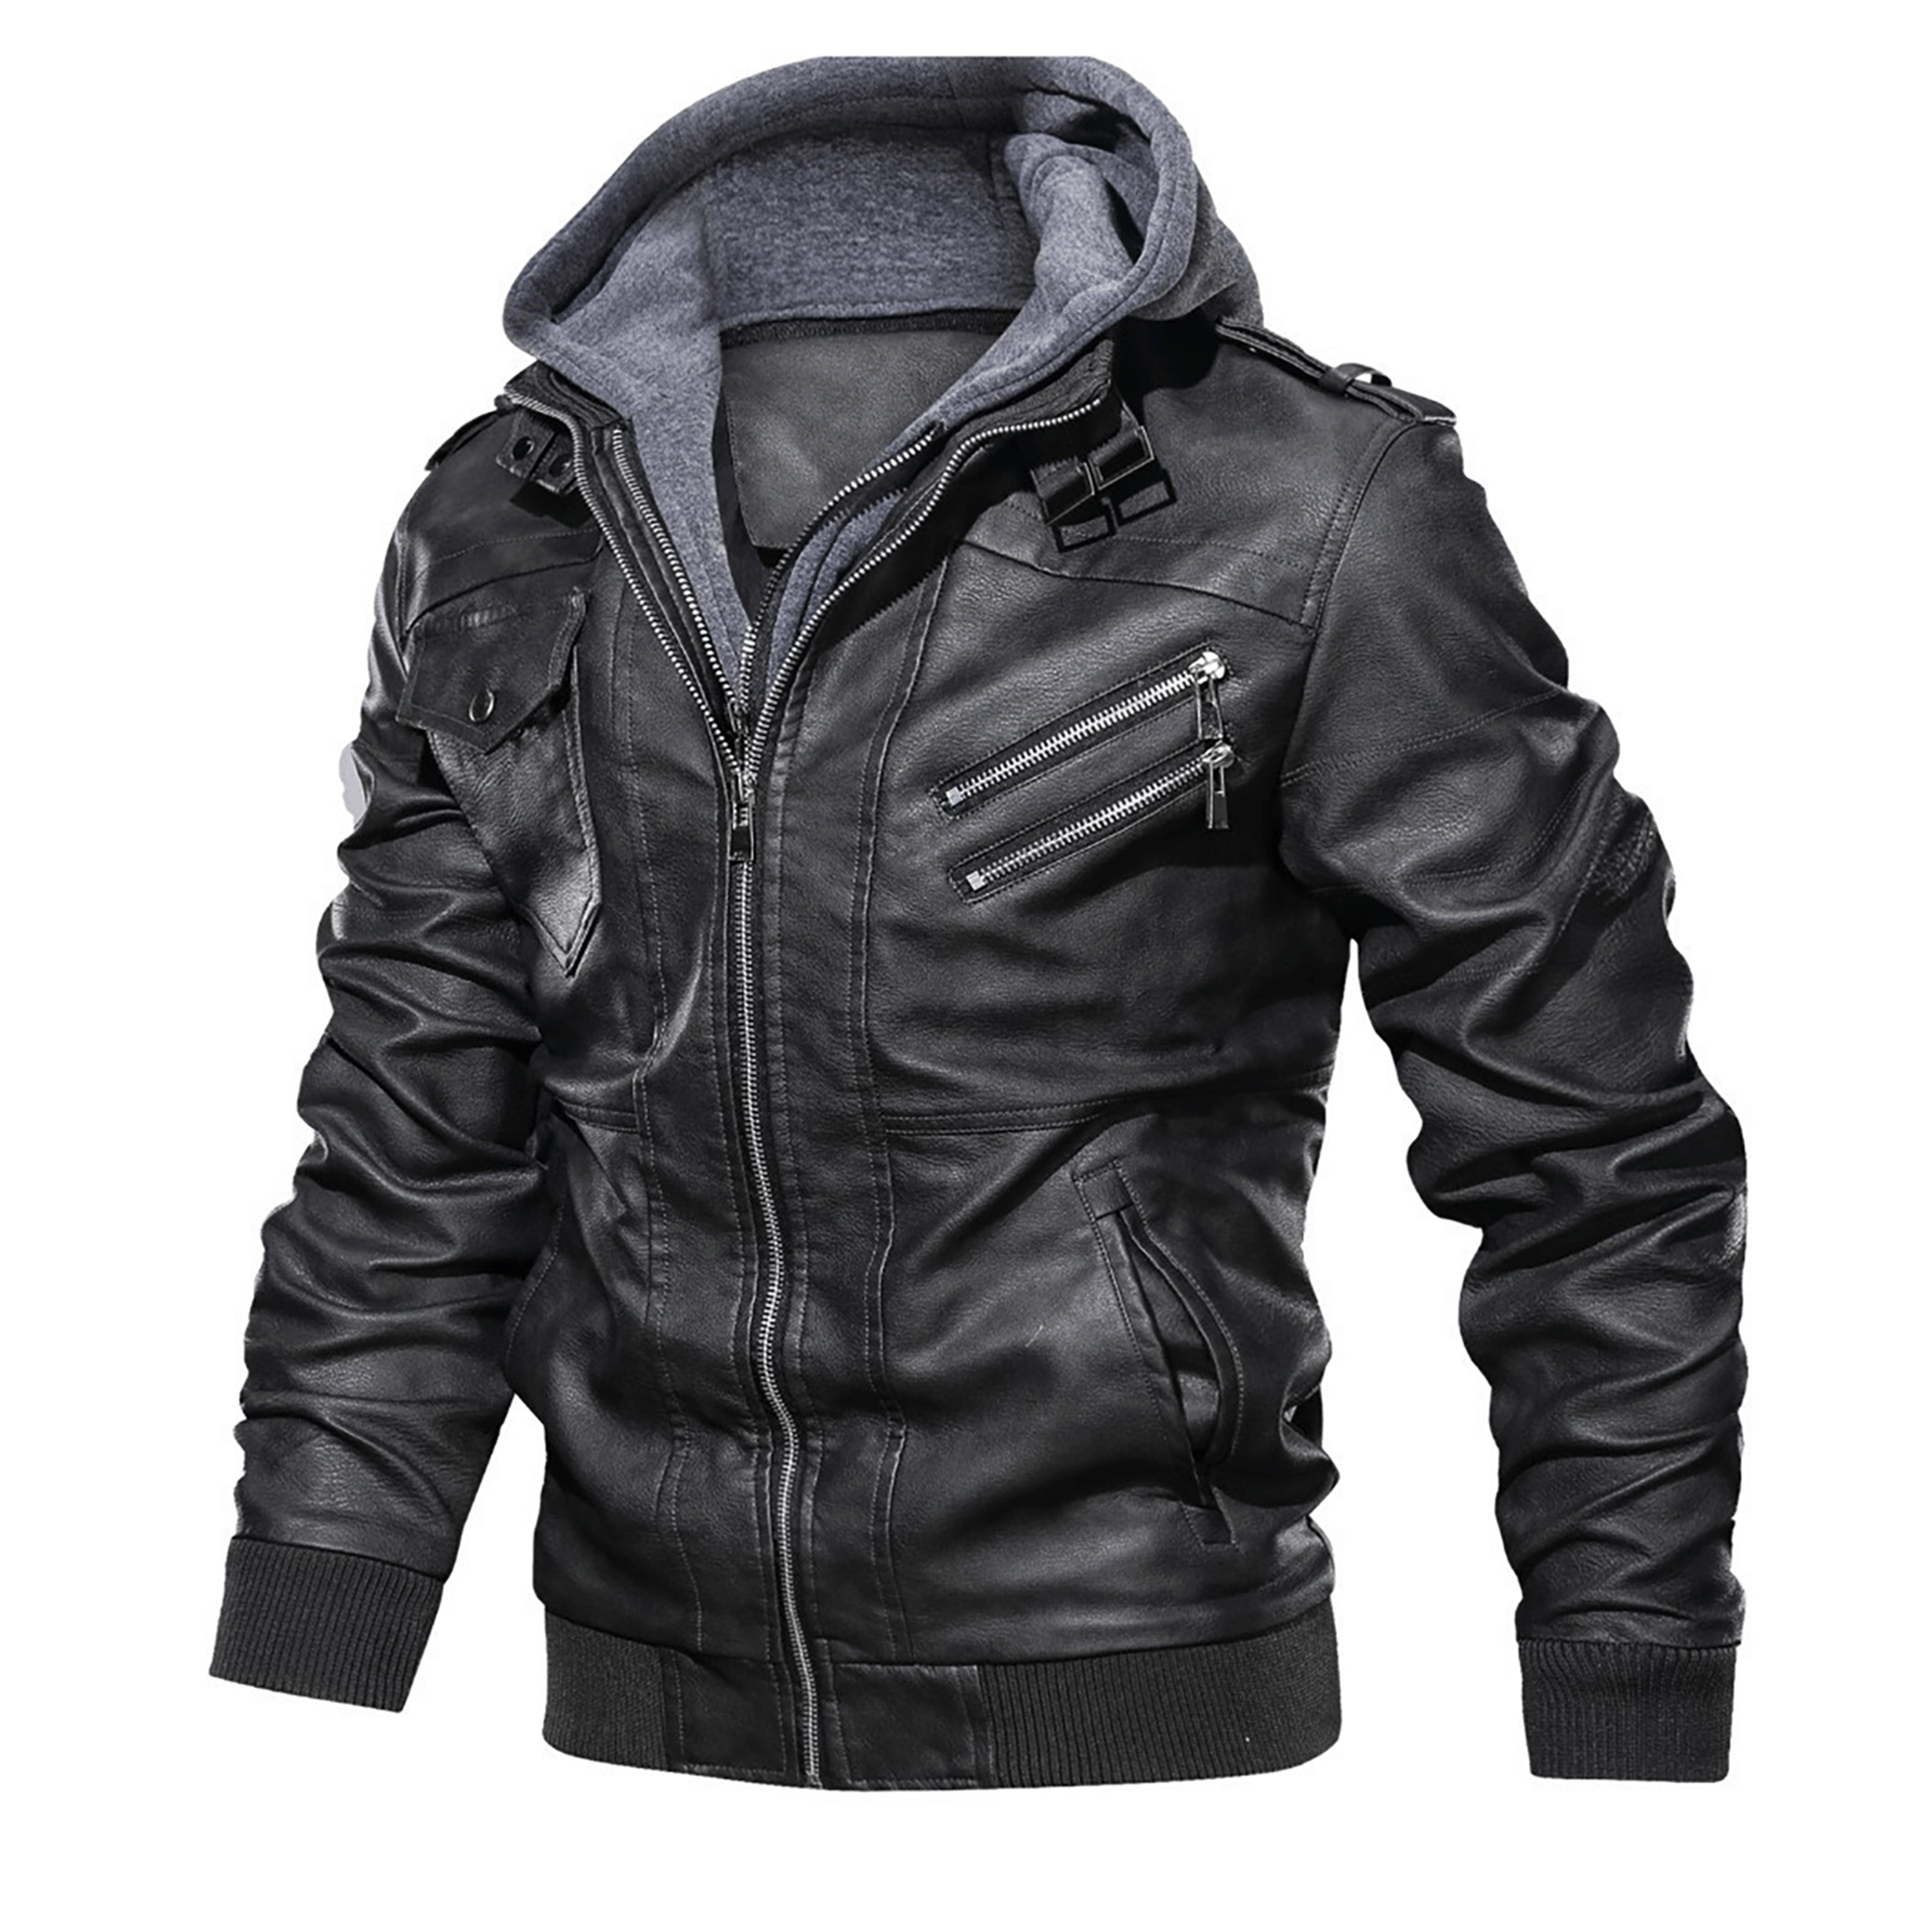 Top leather jackets and latest products 159